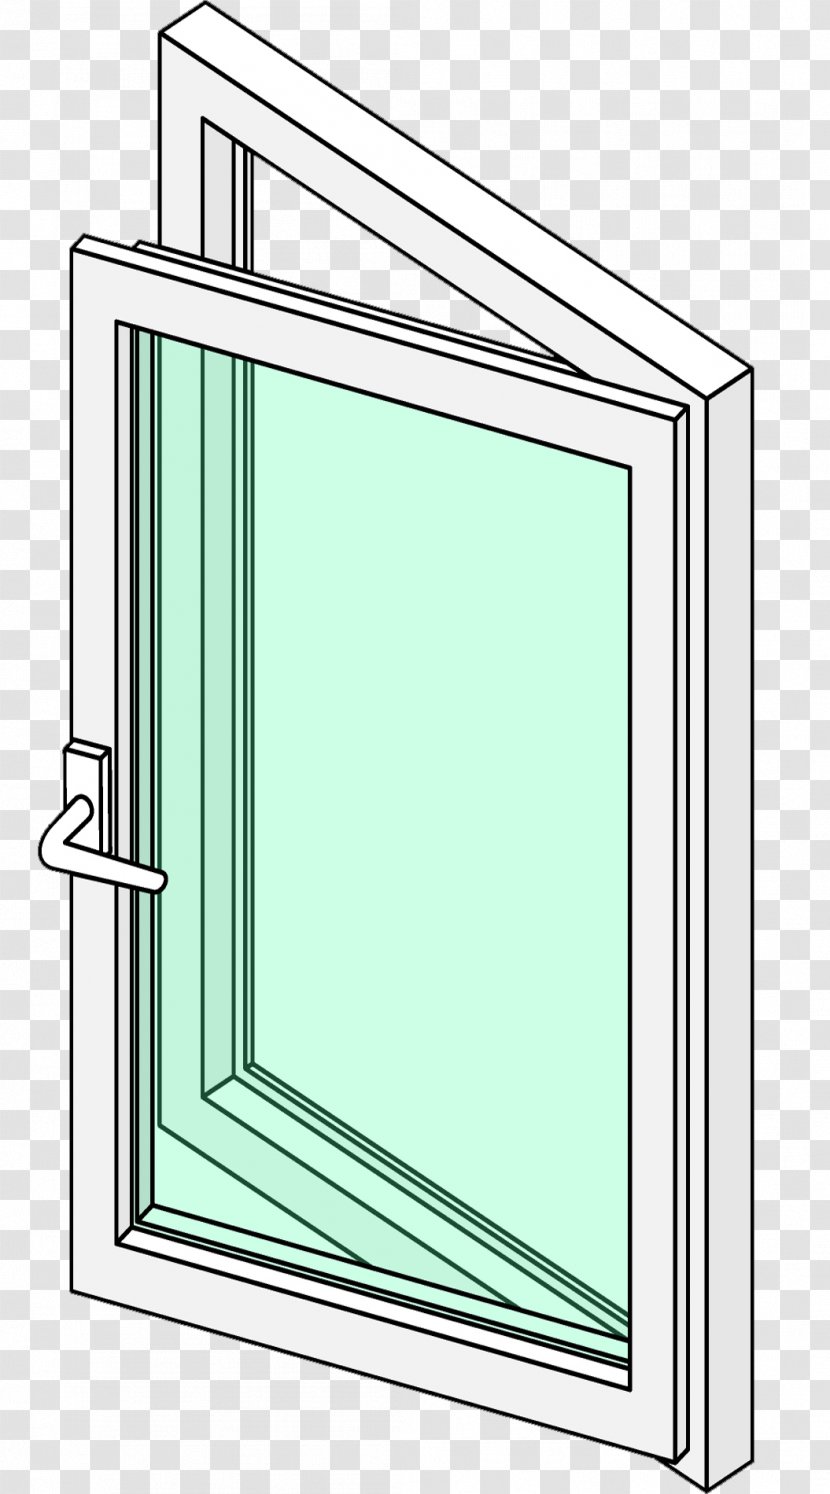 Door Handle Angle Line Picture Frames - Window - Bearing Frame Transparent PNG